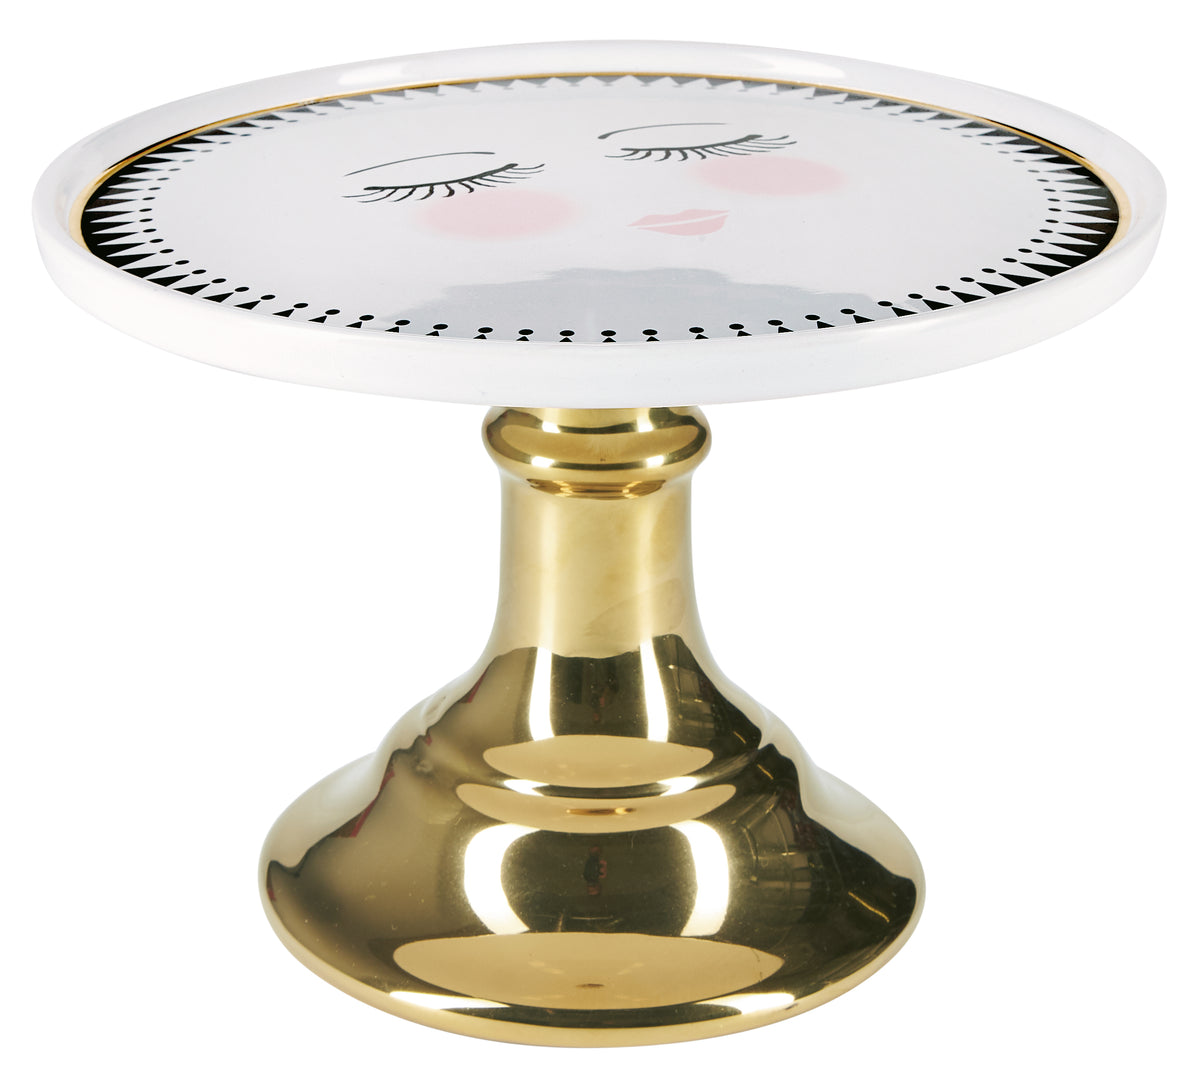 Miss Etoile Closed Eyes Cake Stand with Gold Foot - Large